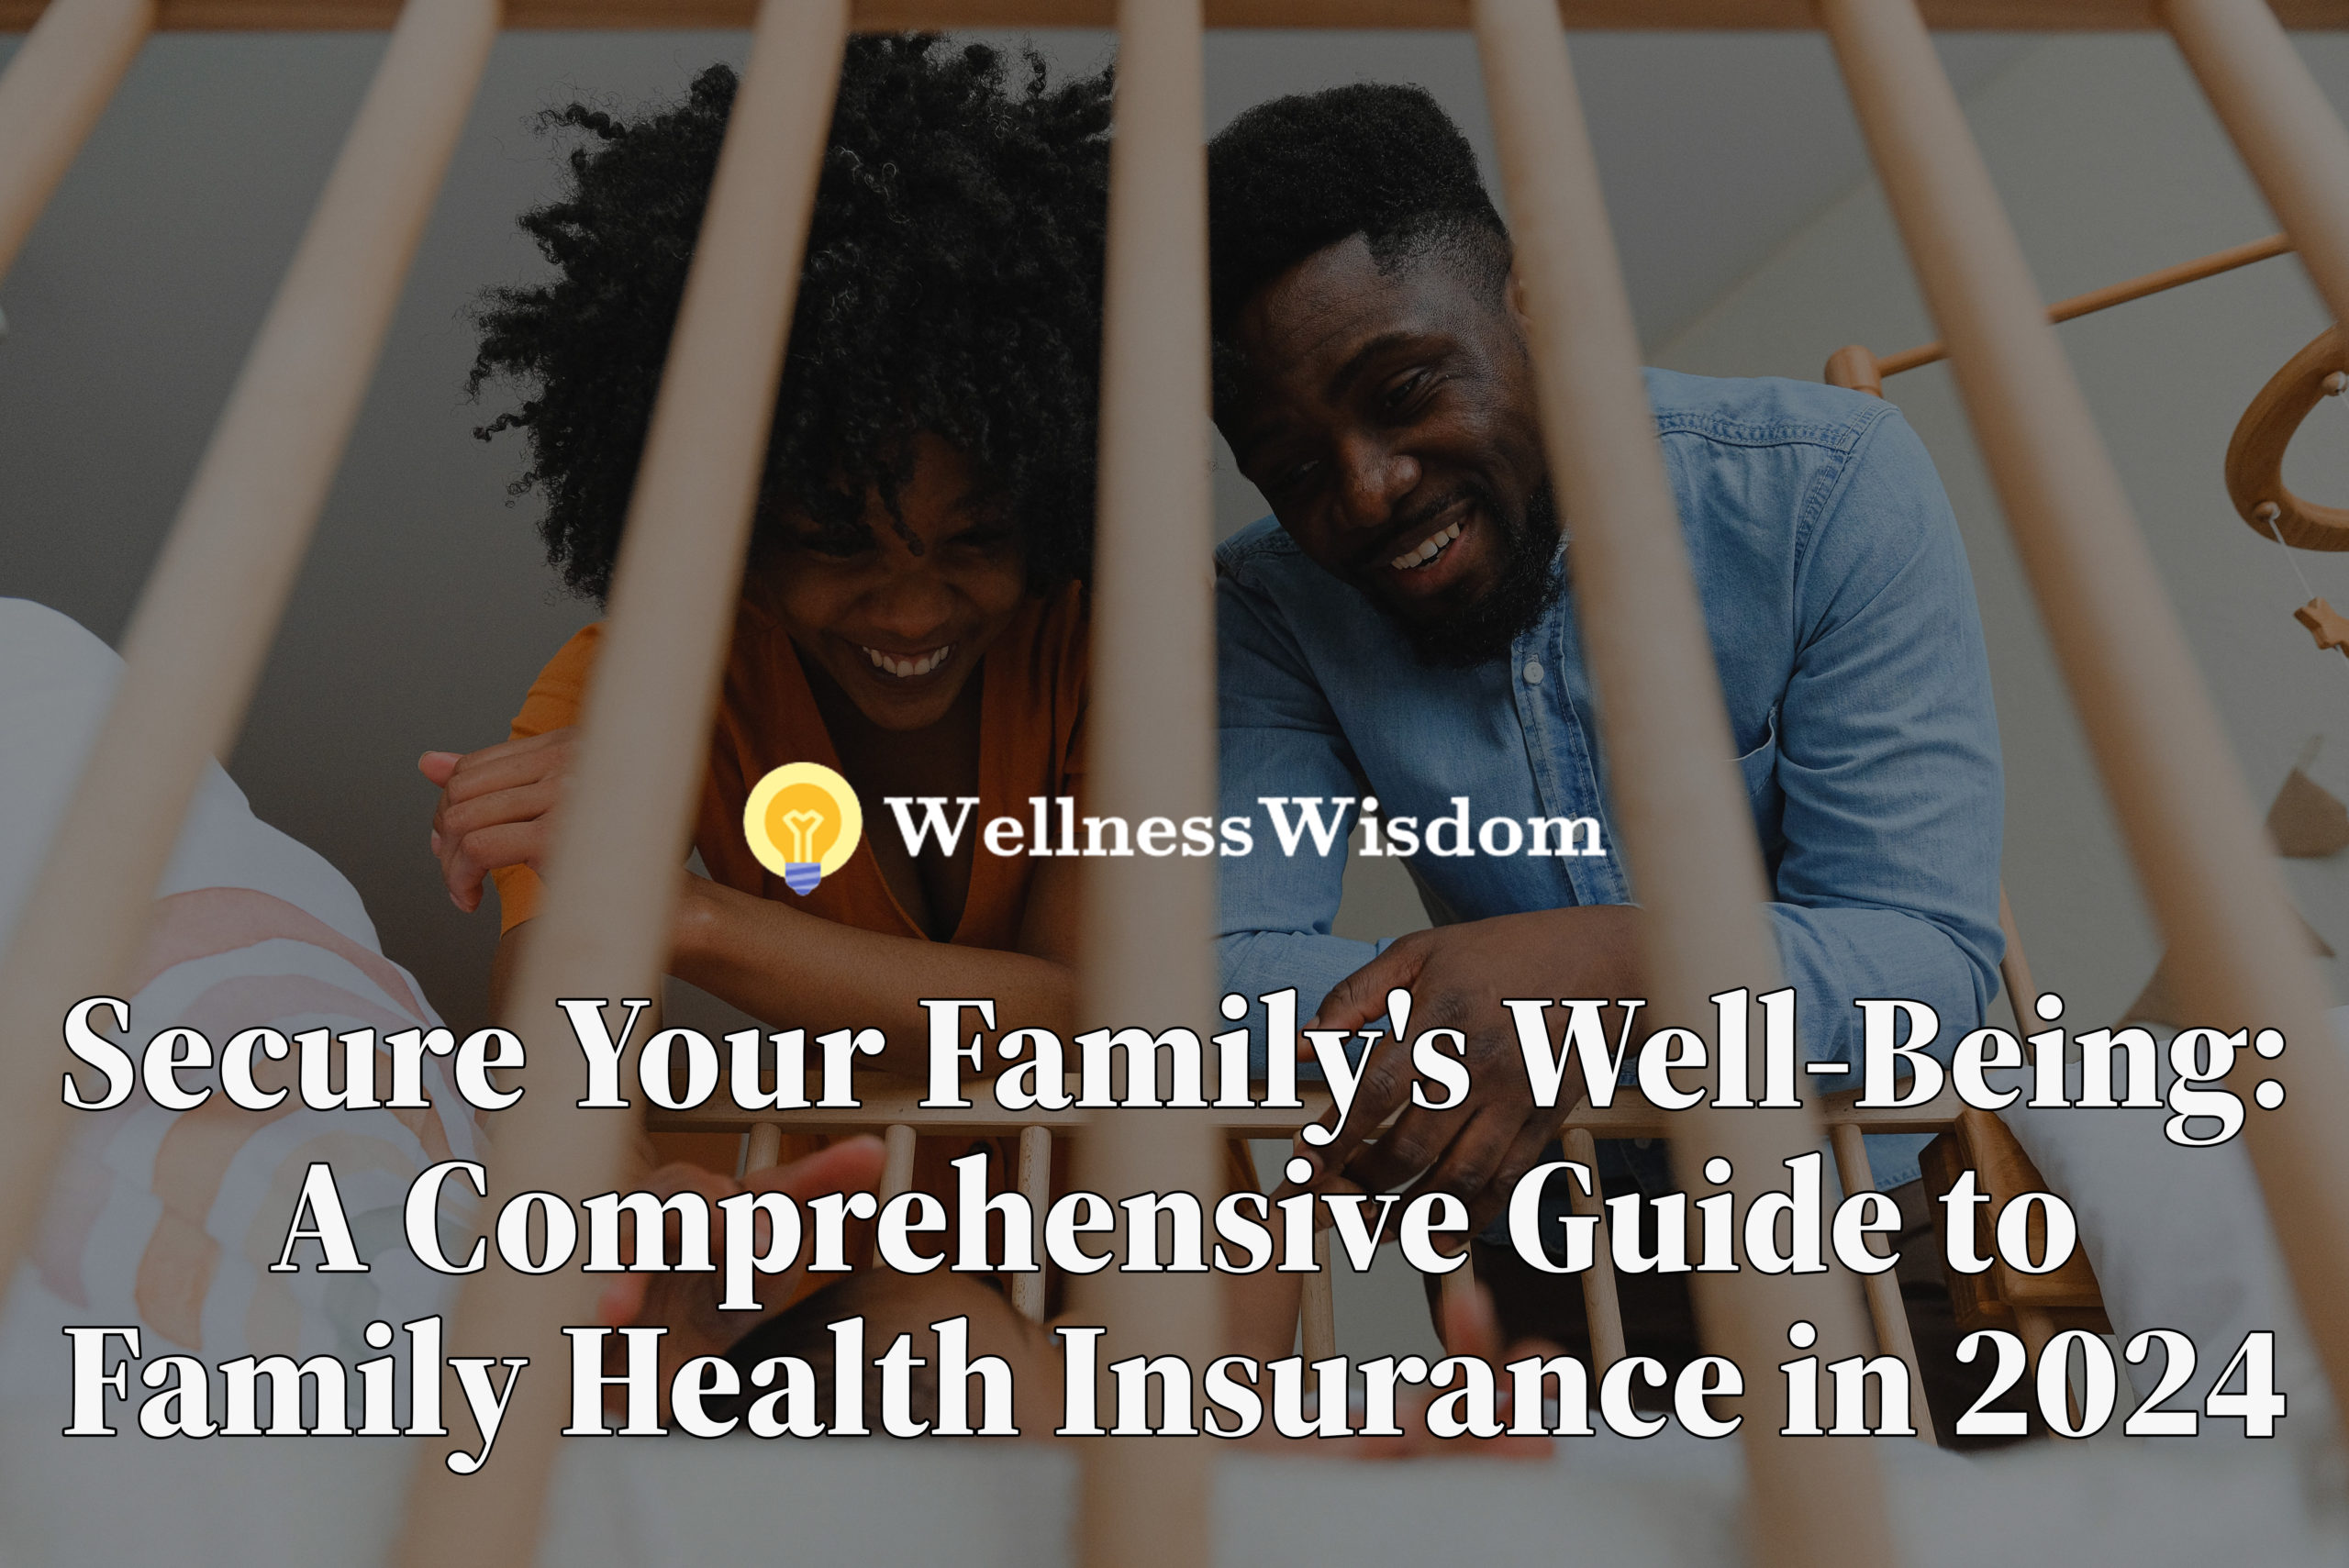 family health insurance, healthcare coverage, financial security, preventive care, healthcare expenses, insurance benefits, peace of mind, holistic well-being, healthcare decisions, insurance options